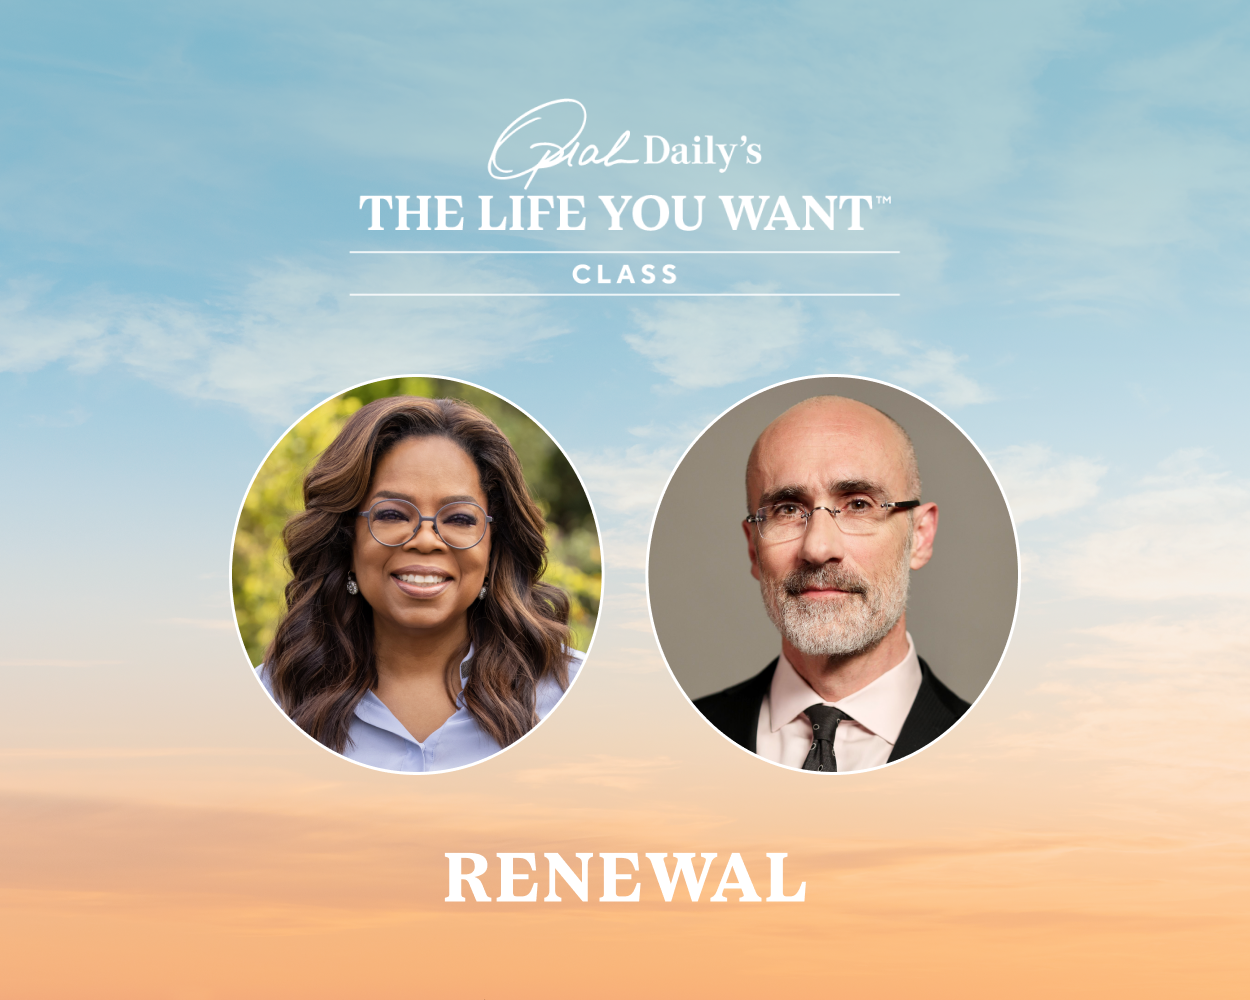 watch oprah’s the life you want class on renewal